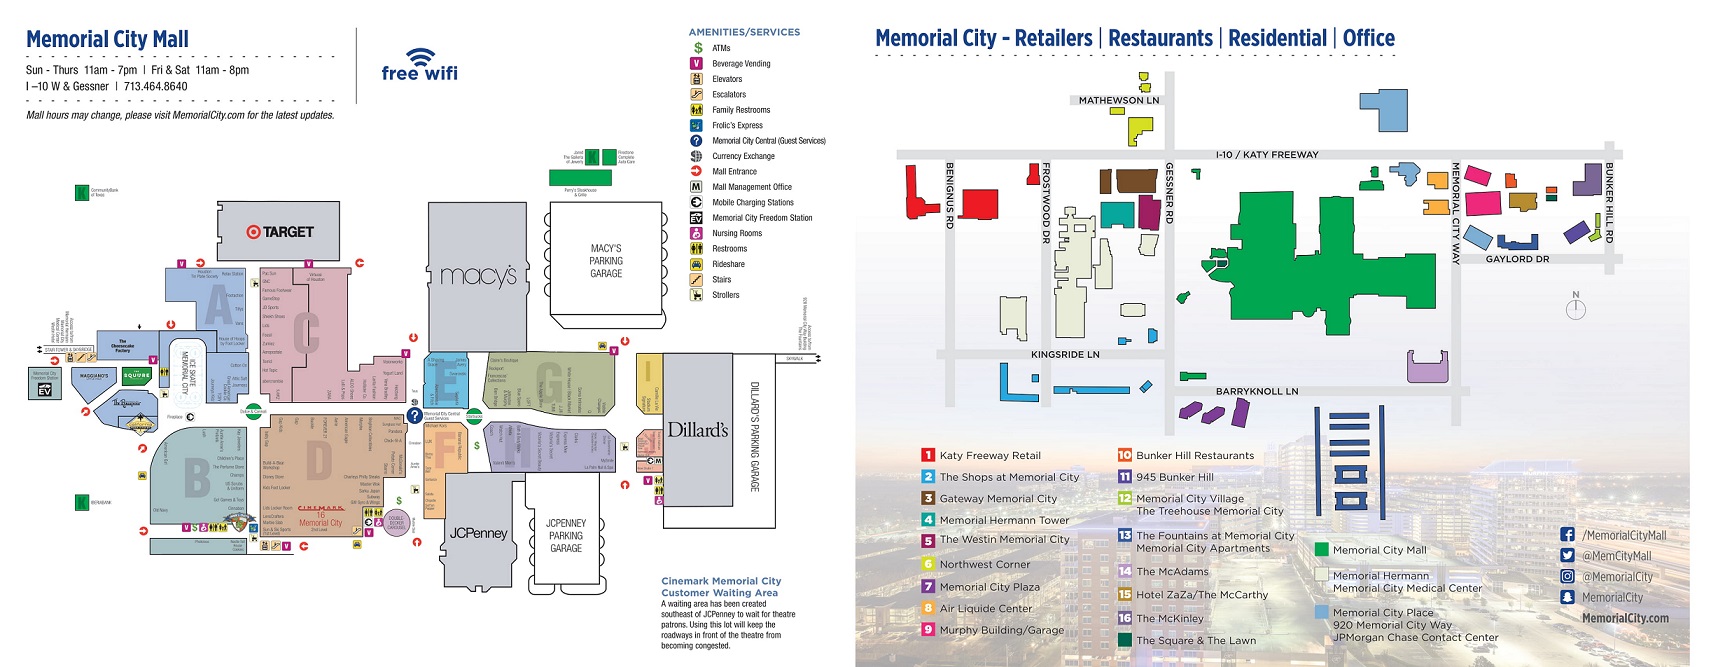 Memorial City Mall Directory Map Images and Photos finder